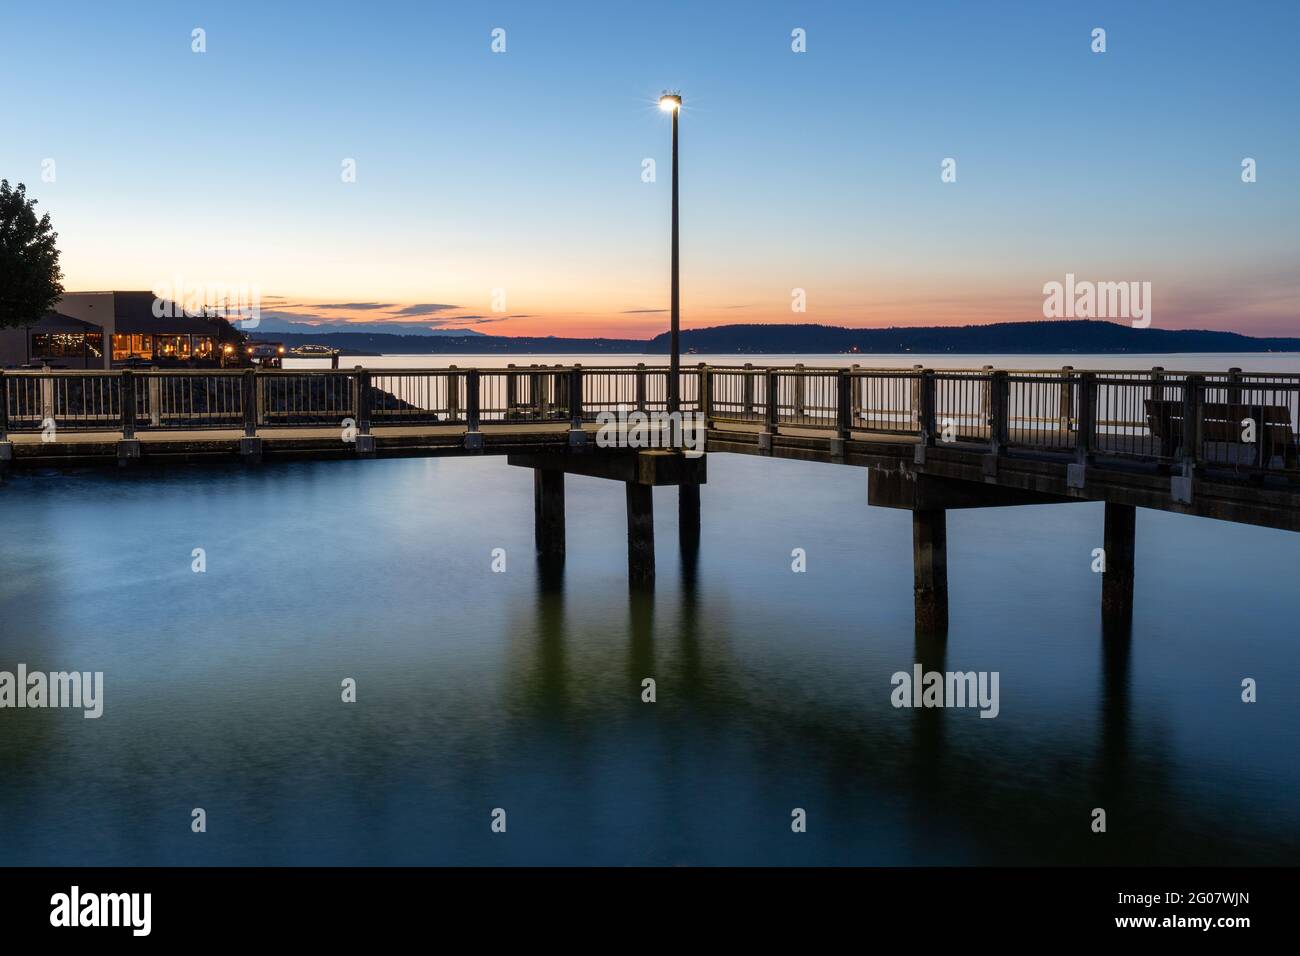 Street Light on Dock Over Water During Blue Hour Stock Photo